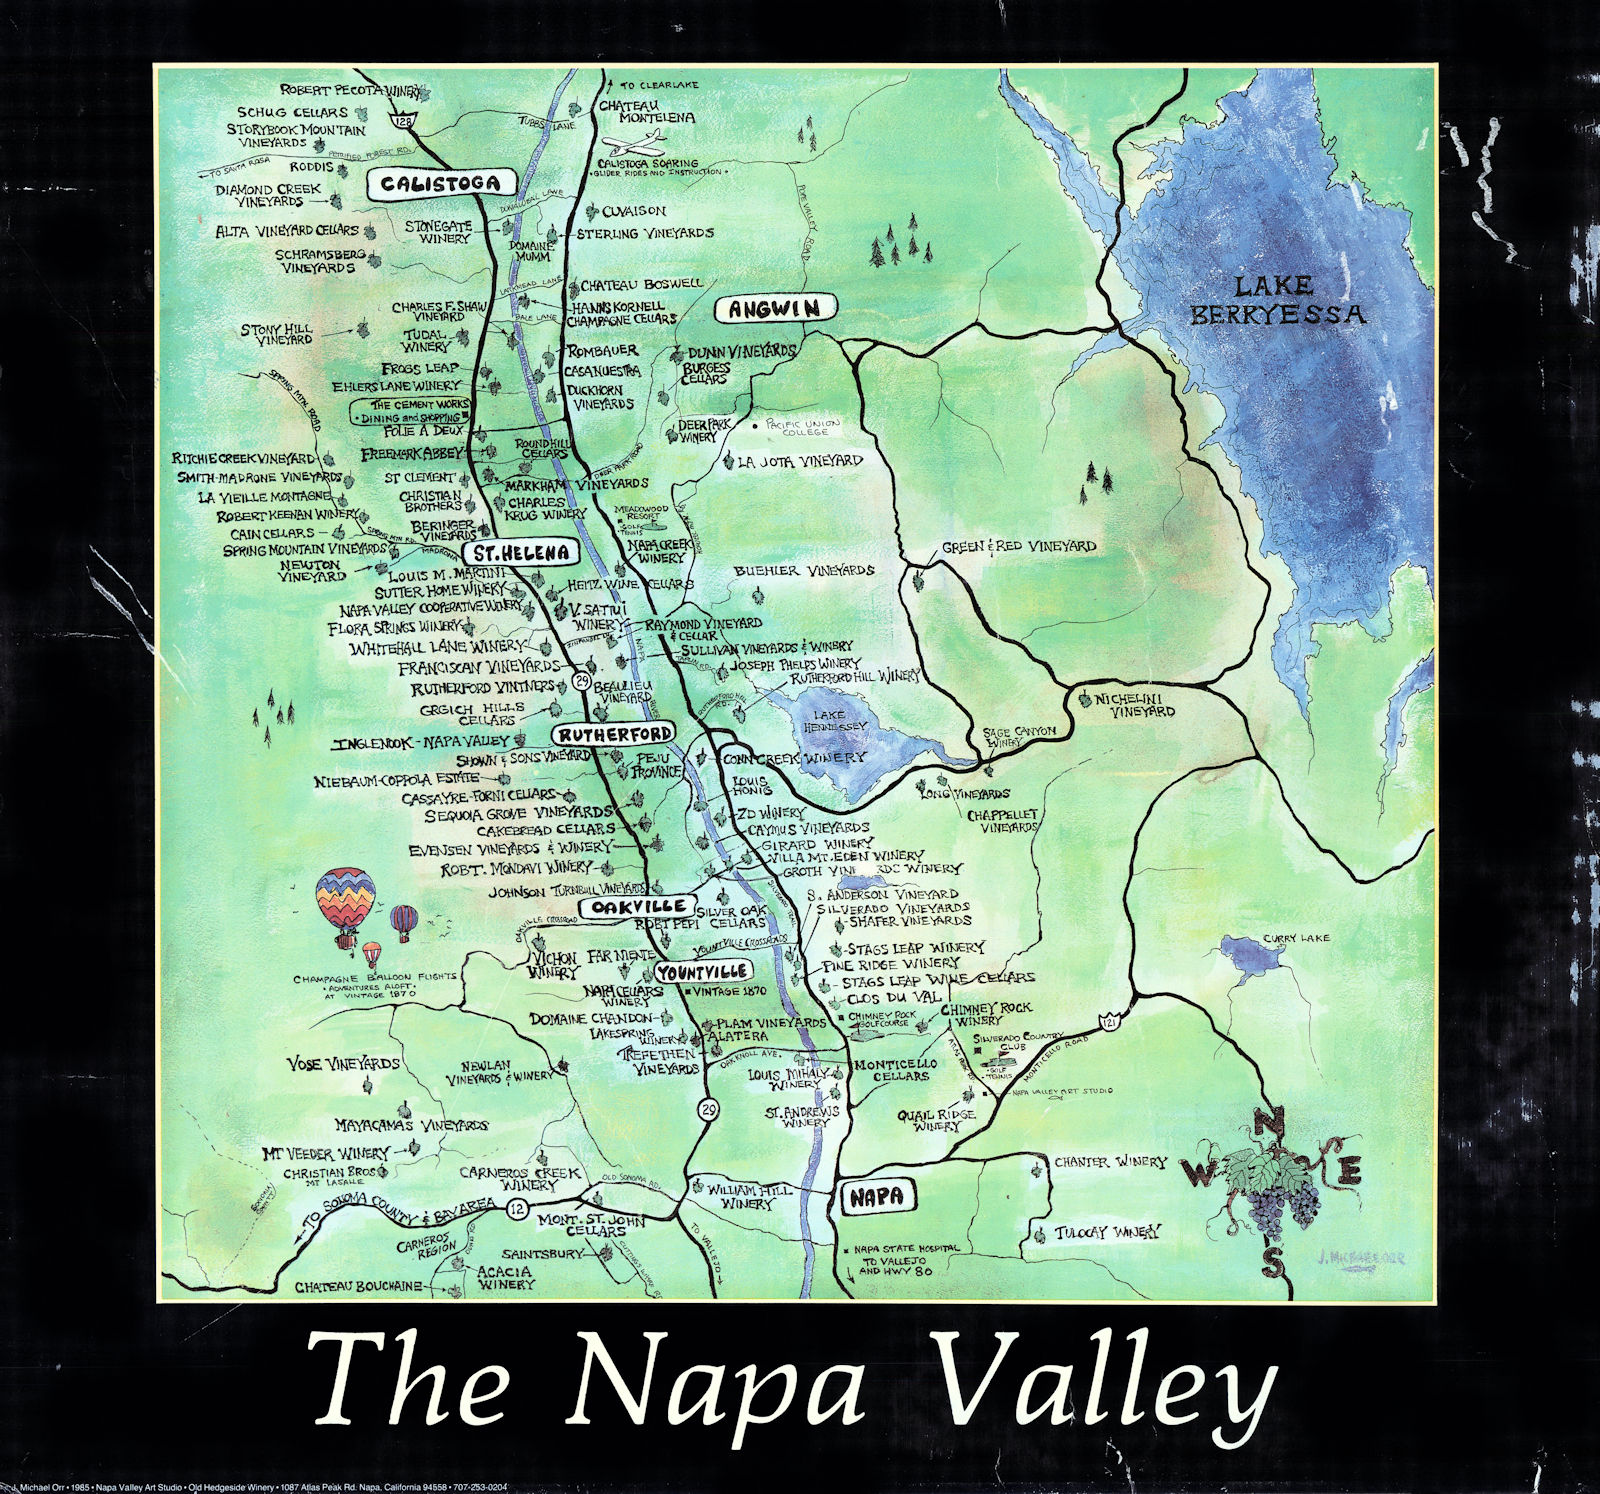 The Napa Valley, California. Wineries & wine region map by J. Michael Orr 1985